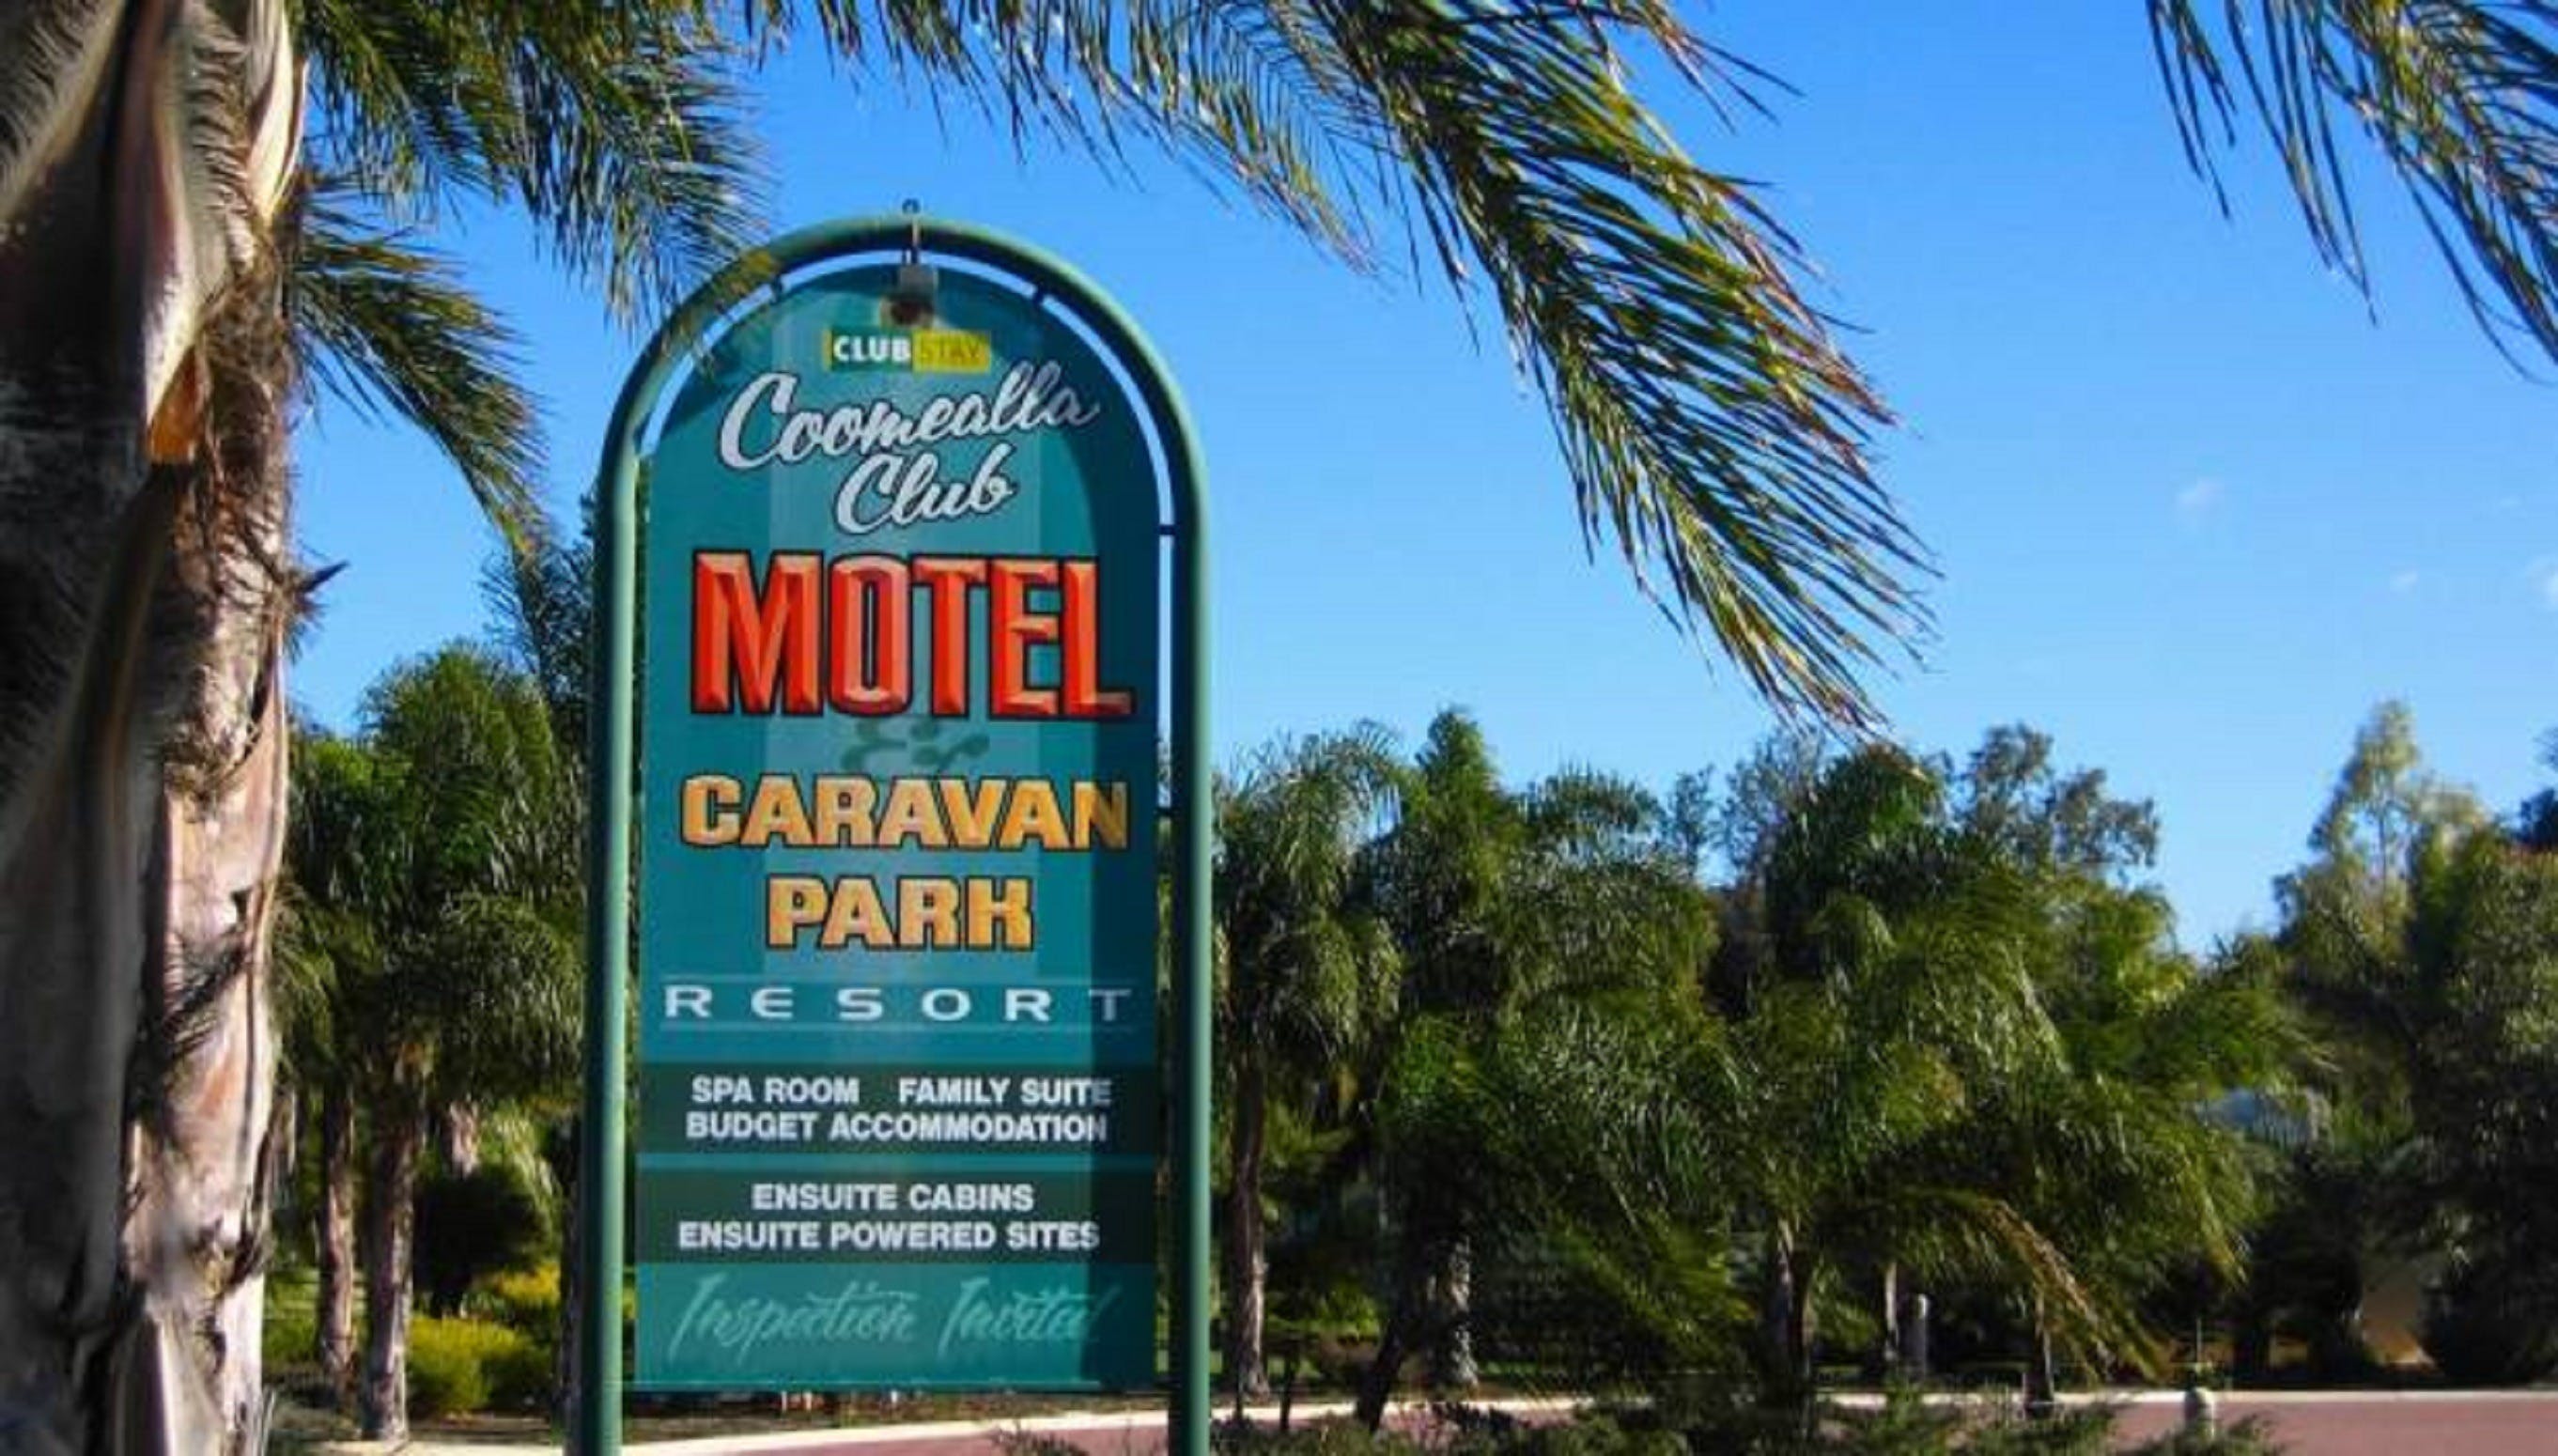 Coomealla Club Motel and Caravan Park Resort - Accommodation in Surfers Paradise